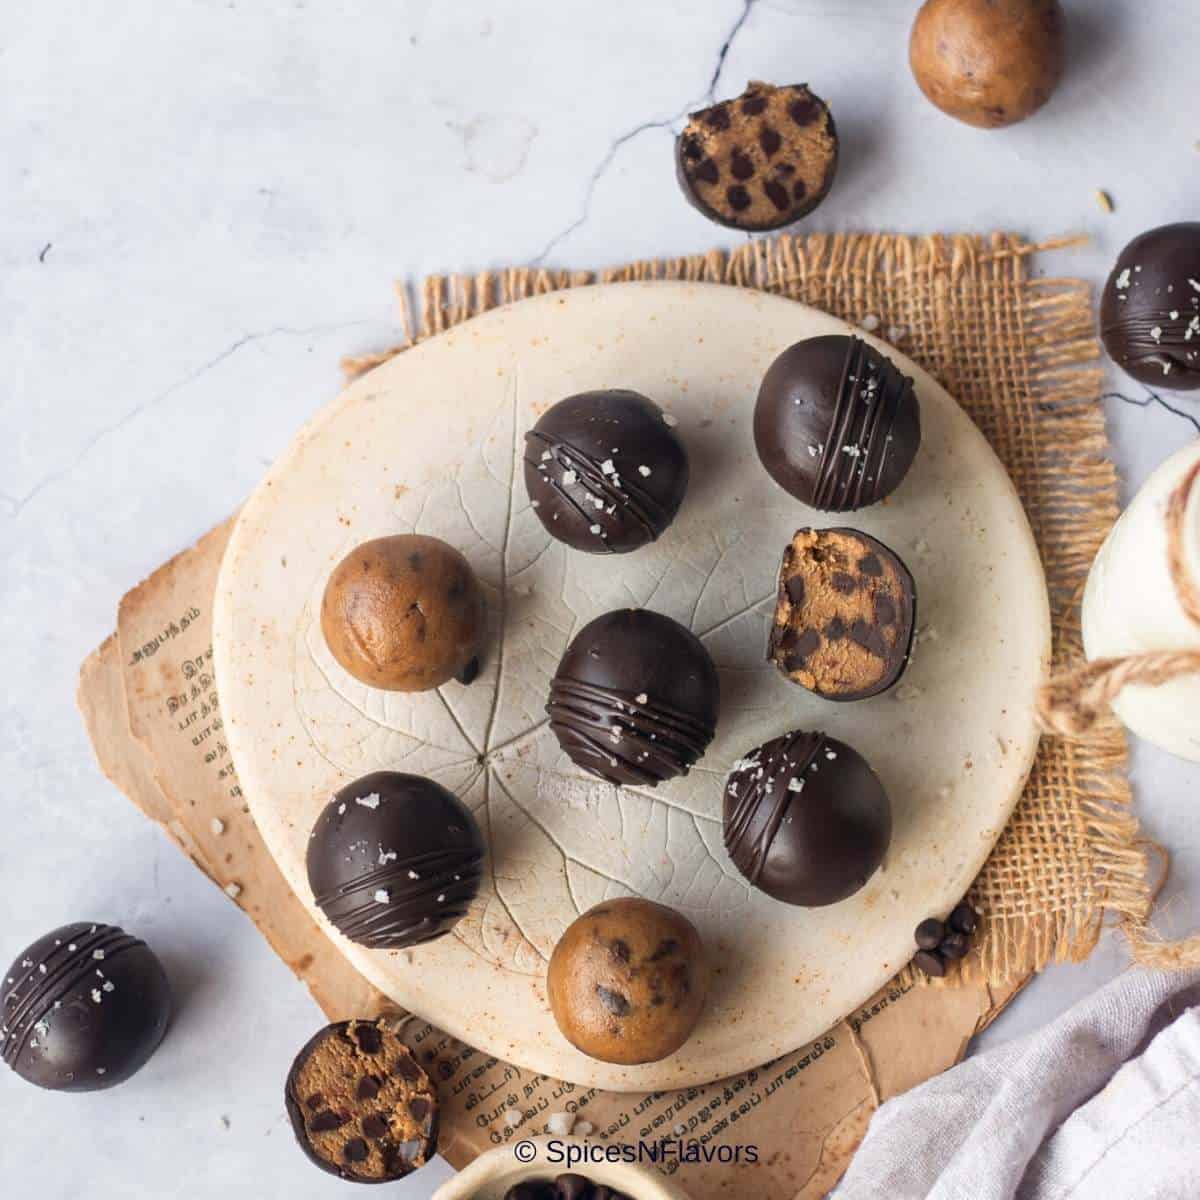 cropped up image of cookie balls laid on a flat surface to show the texture of cookie balls from within